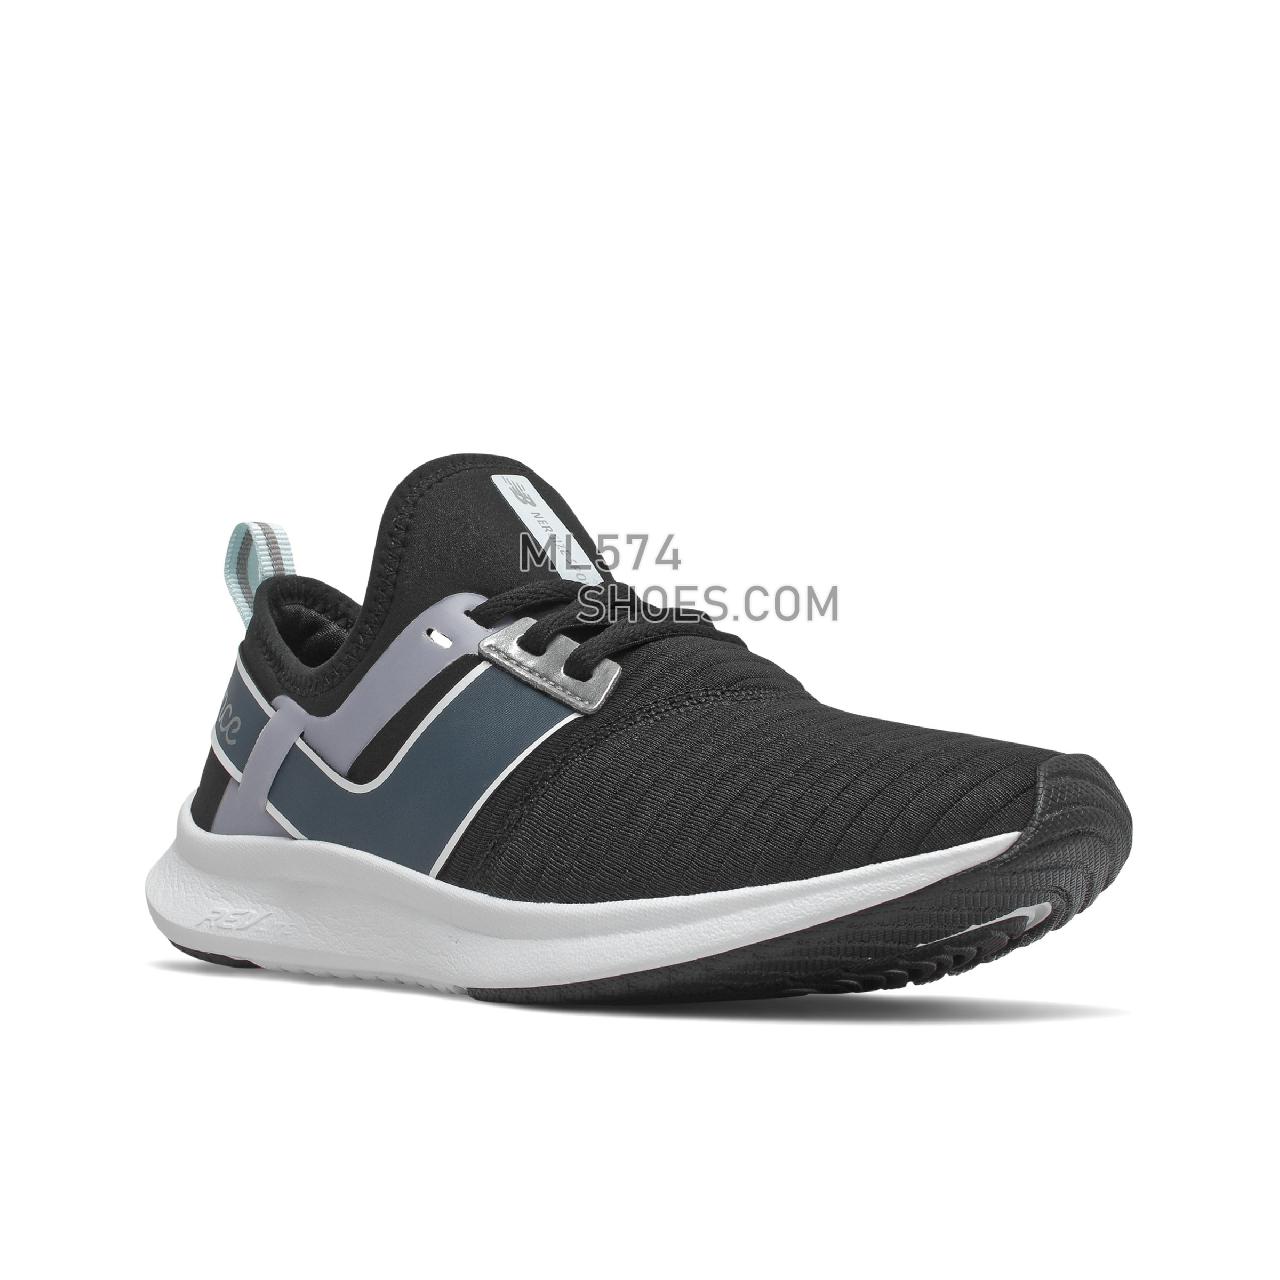 New Balance NB Nergize Sport - Women's Sport Style Sneakers - Black with Deep Ocean Grey - WNRGSNB1